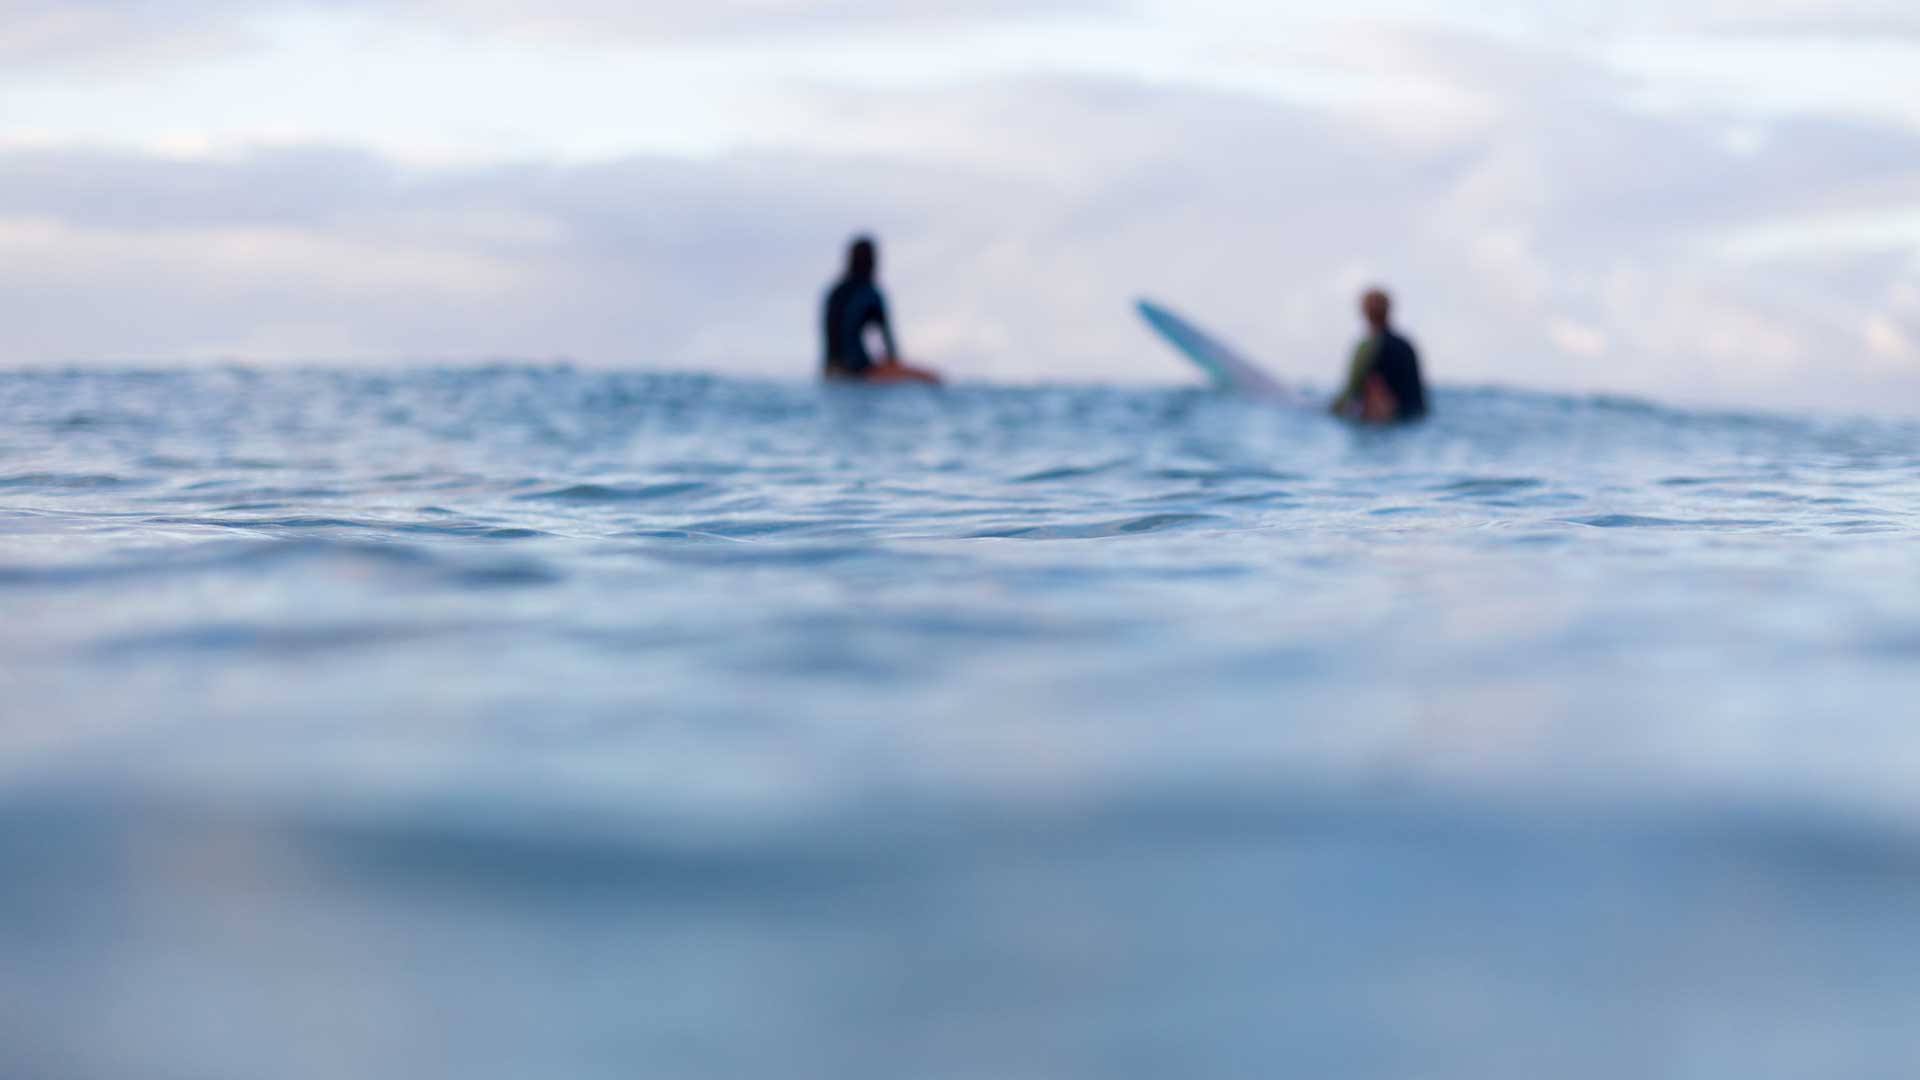 Two people surfing on the ocean